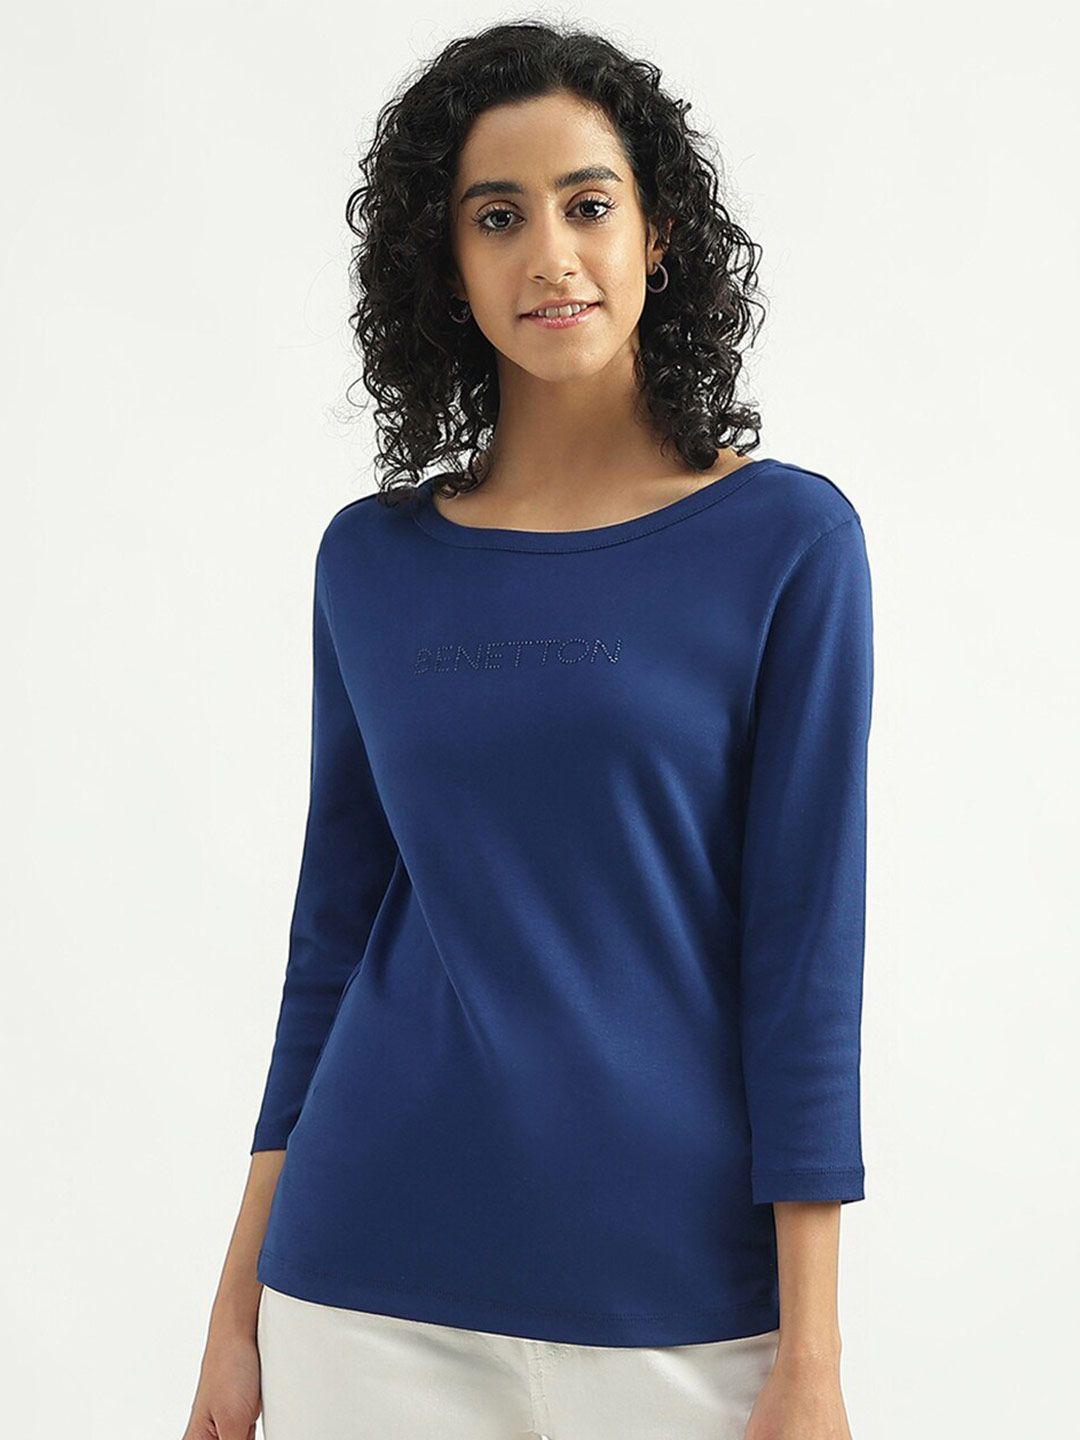 united colors of benetton boat neck cotton top